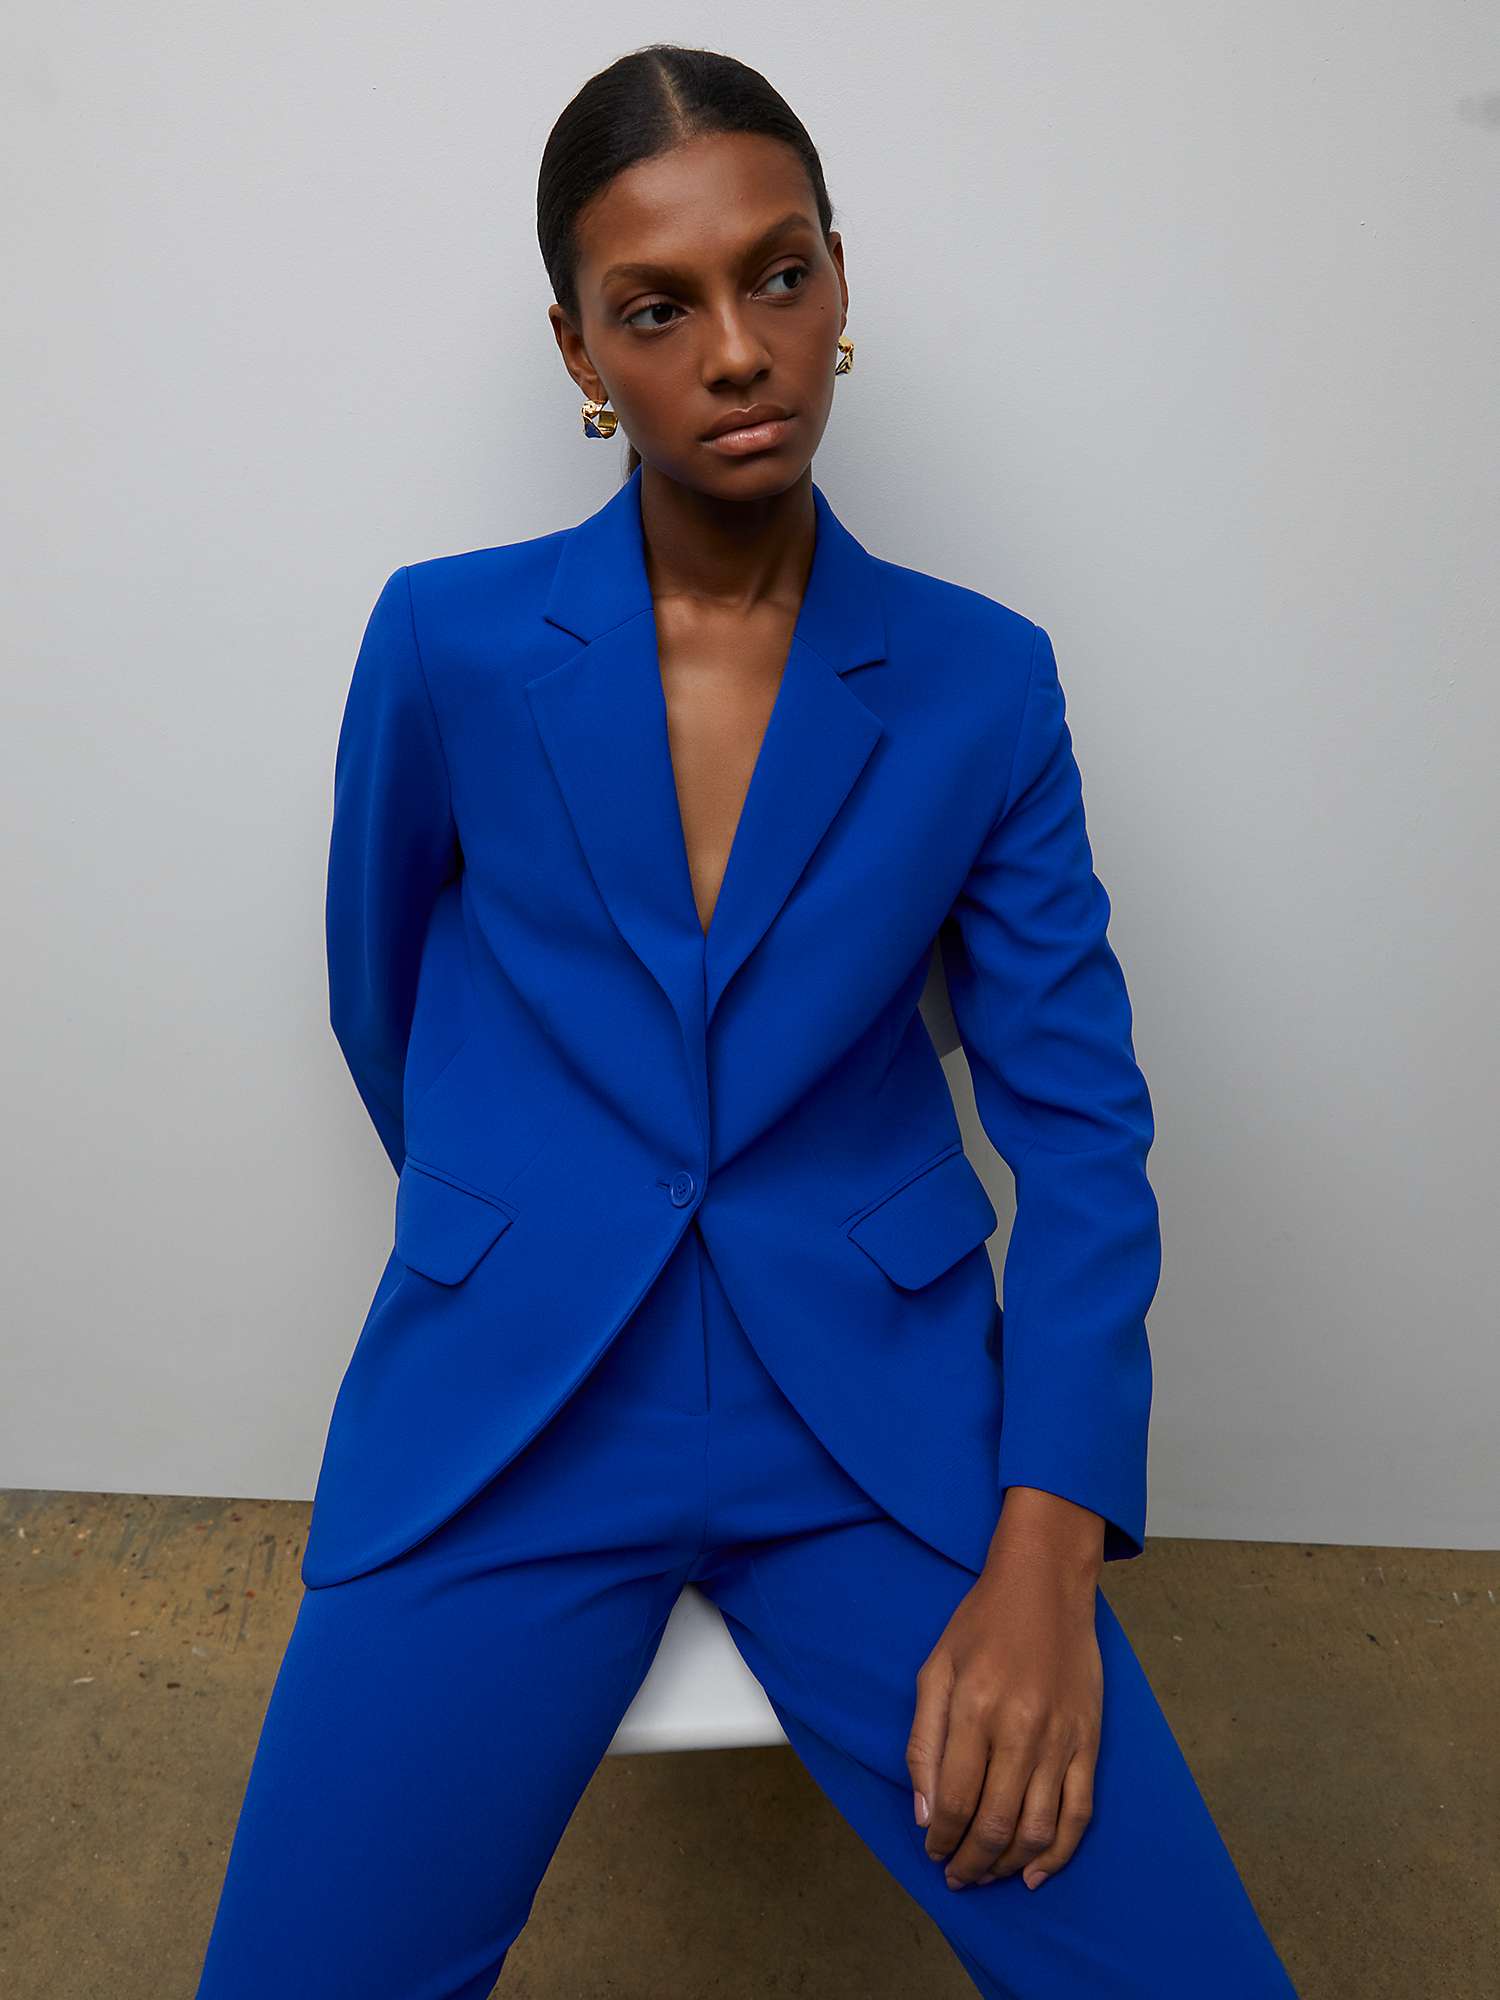 Finery Harper Tailored Trousers, Cobalt at John Lewis & Partners